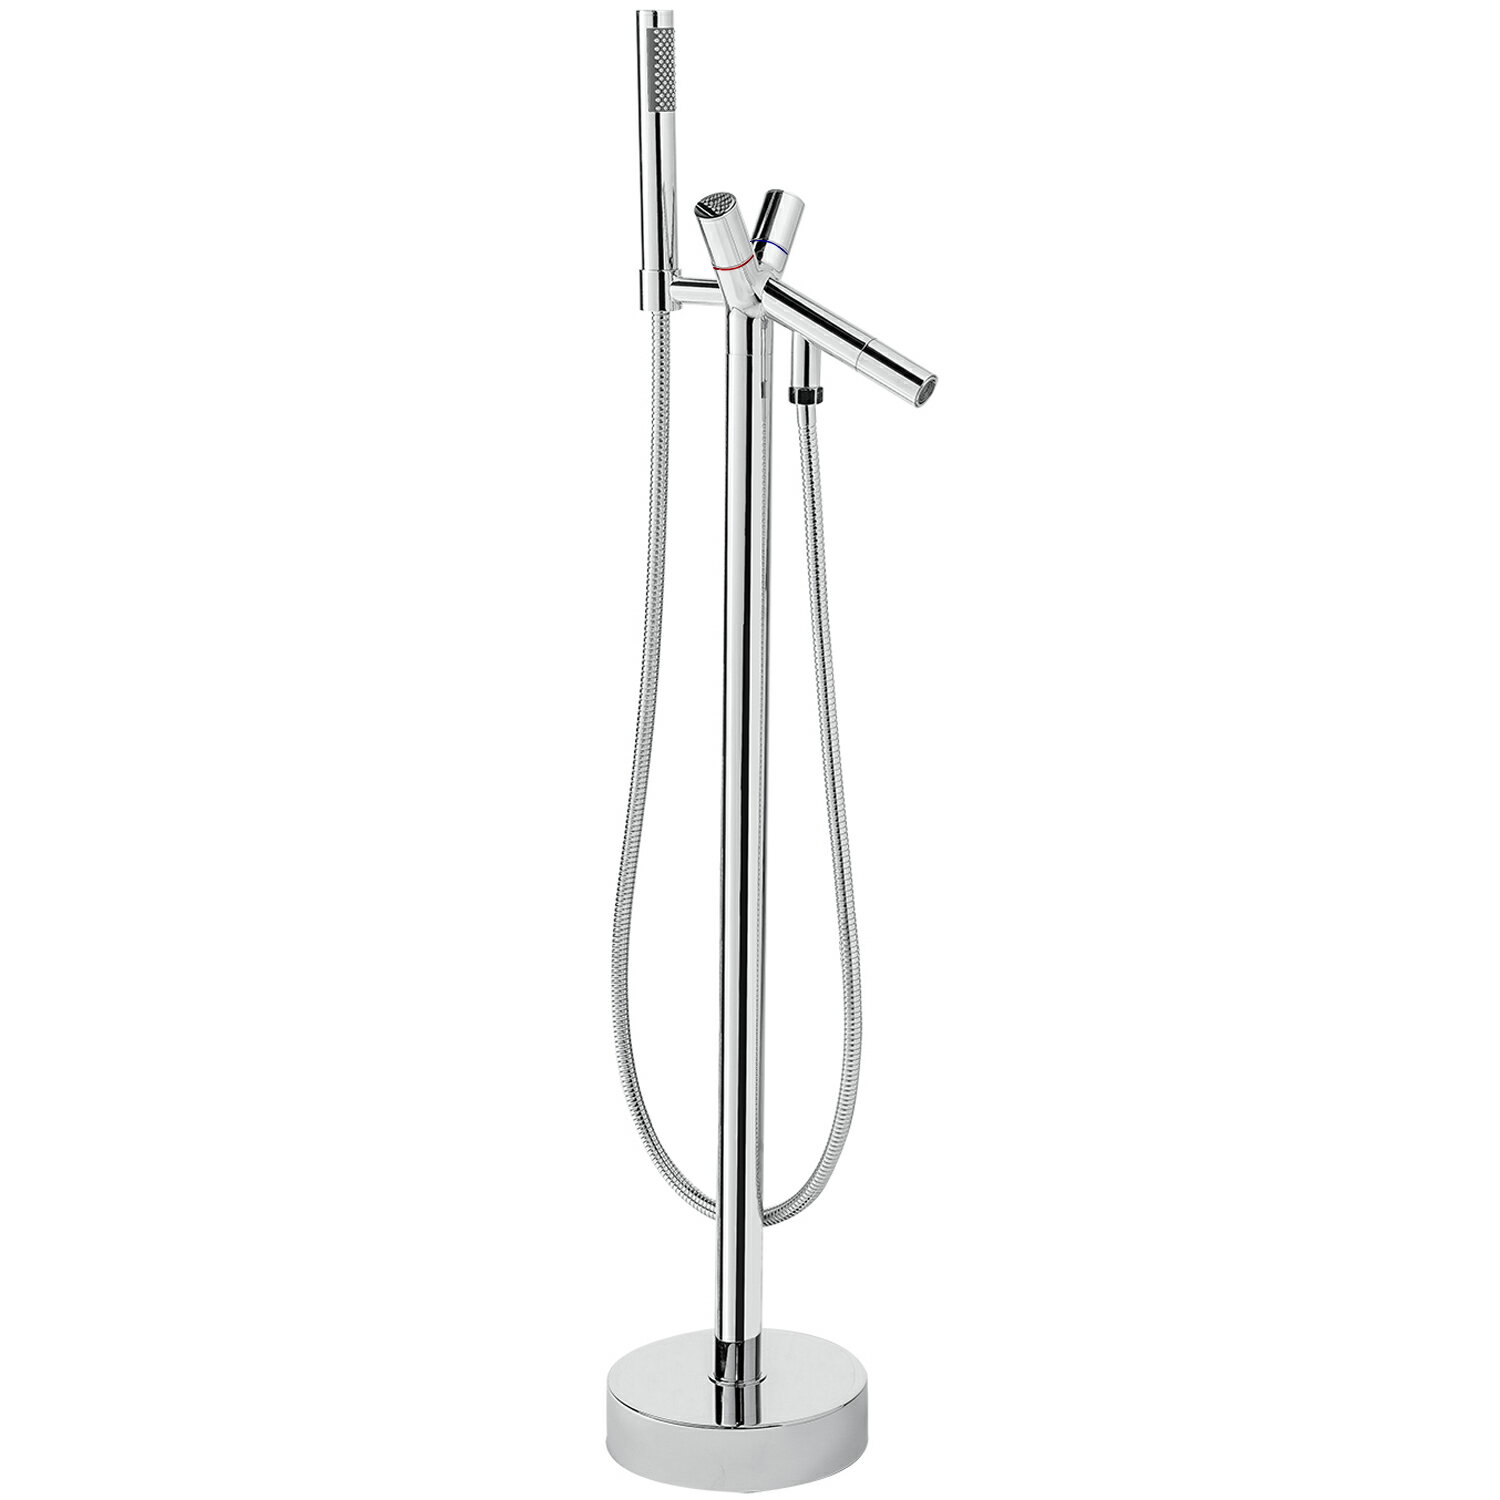 Akdy Akdy Free Standing Floor Mounted Bathtub Faucet With